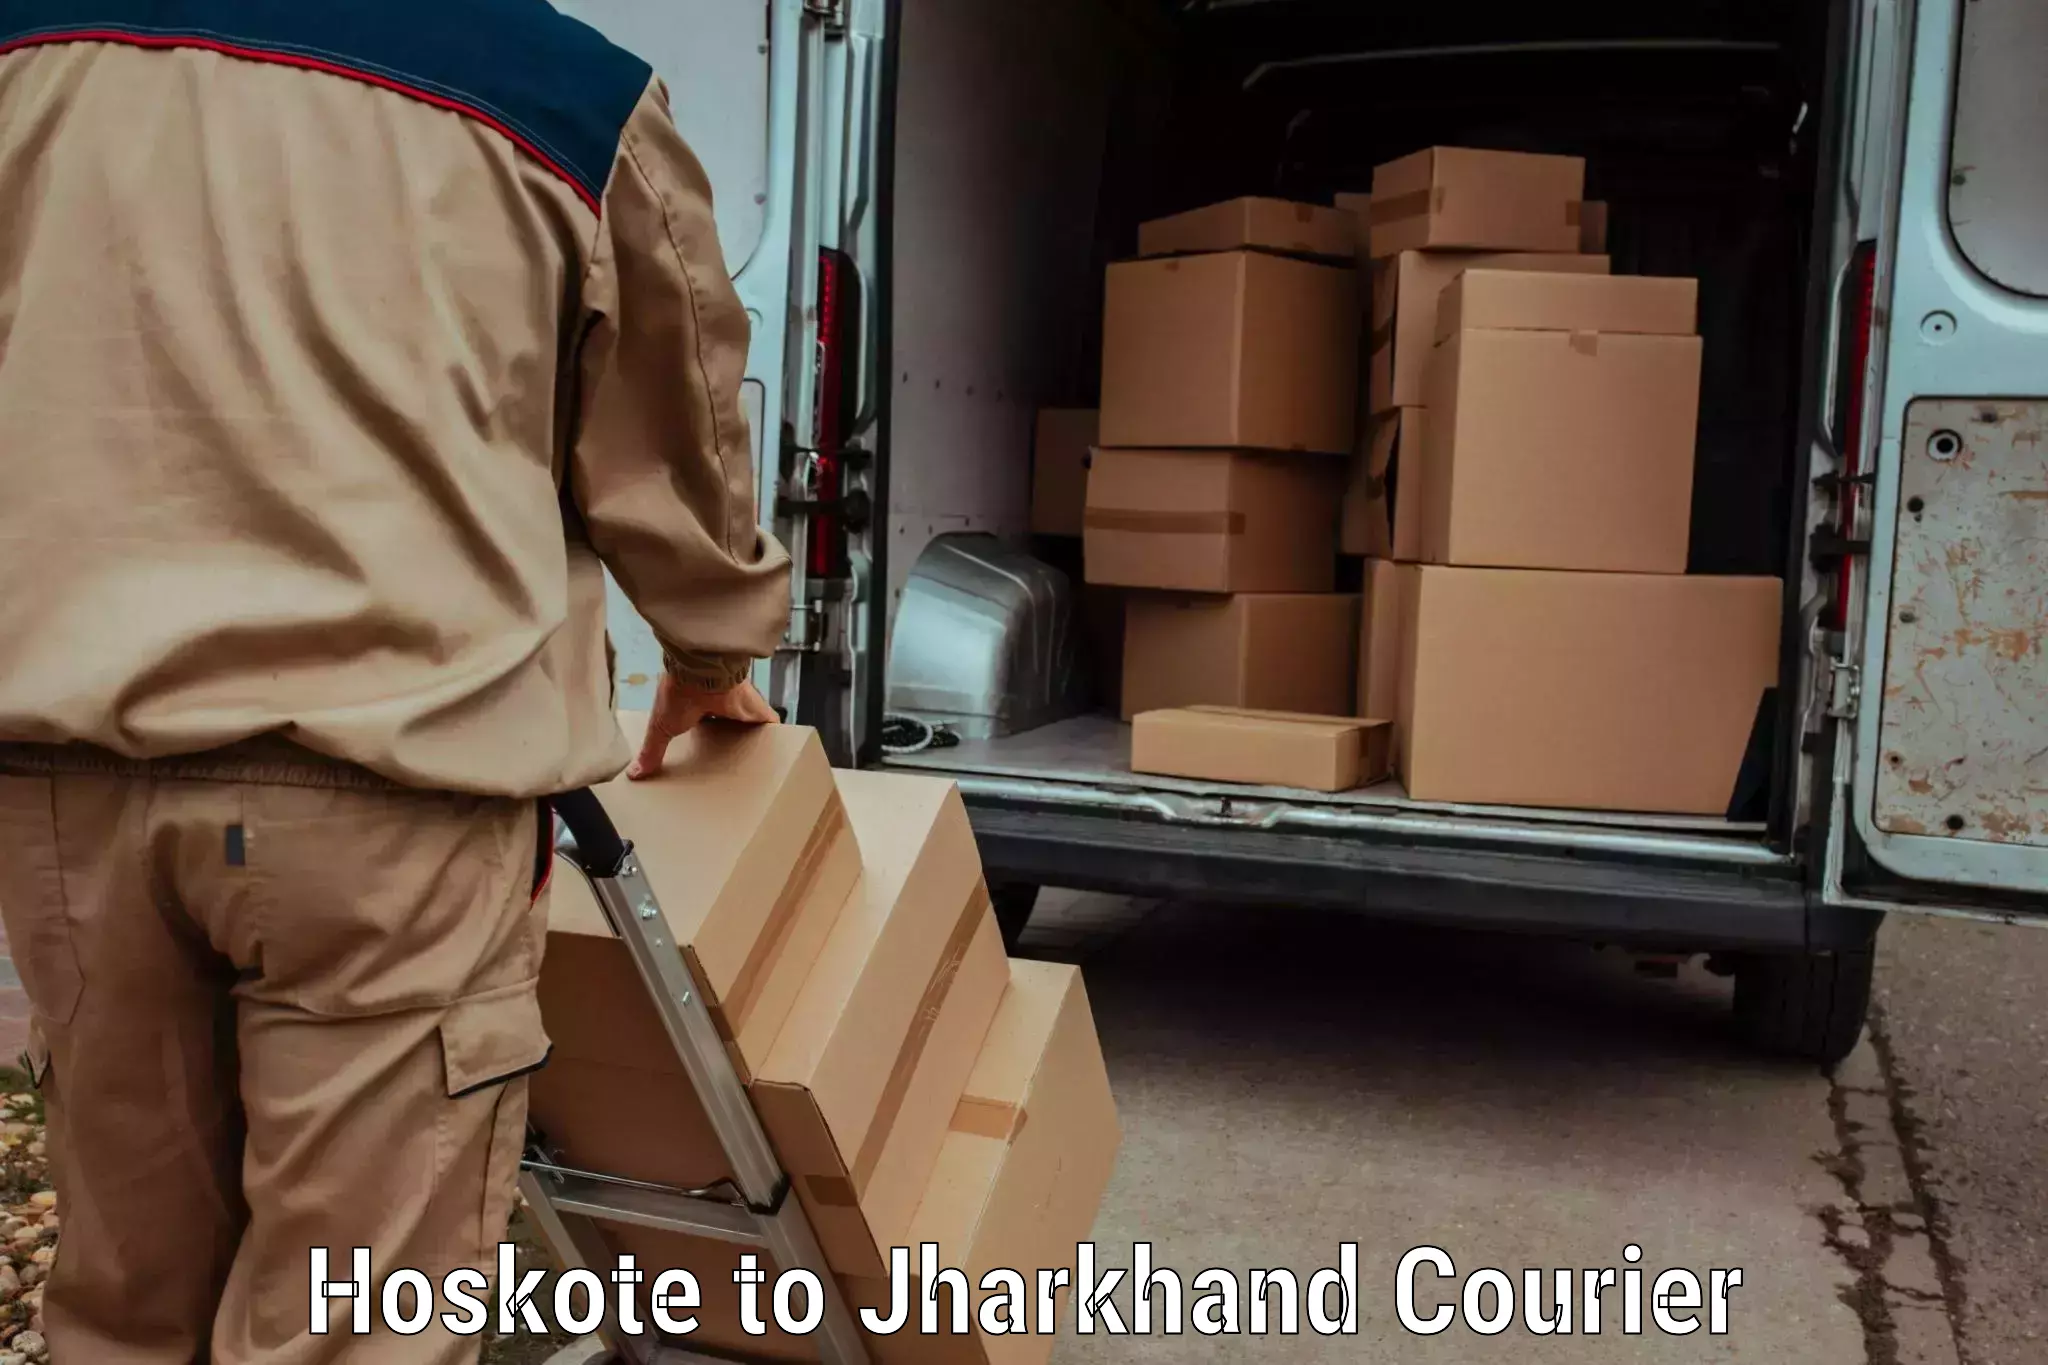 On-call courier service Hoskote to Bokaro